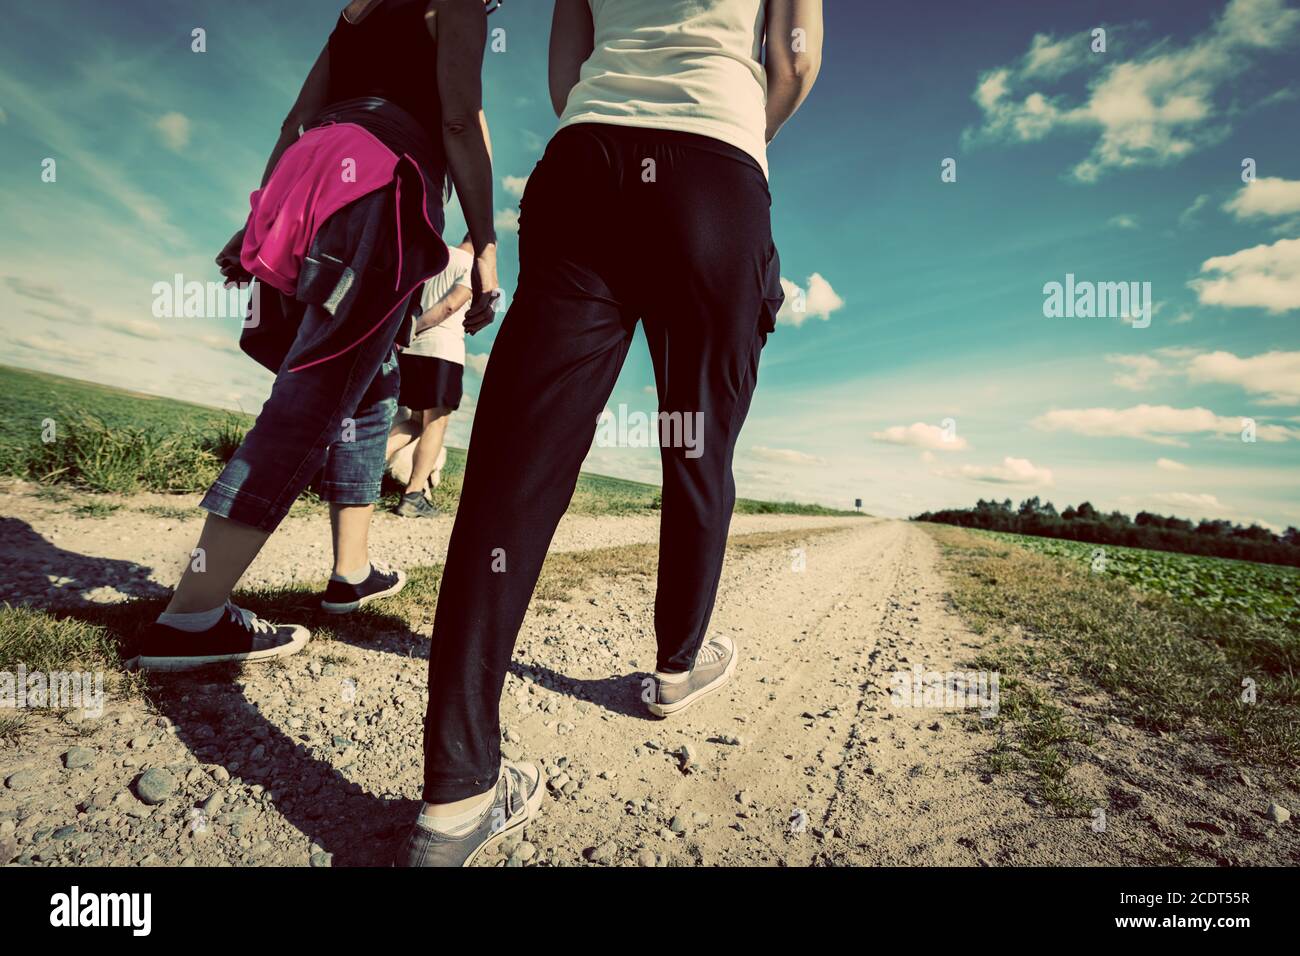 Family walk in countryside on a sunny day. Legs perspective. Vintage look Stock Photo